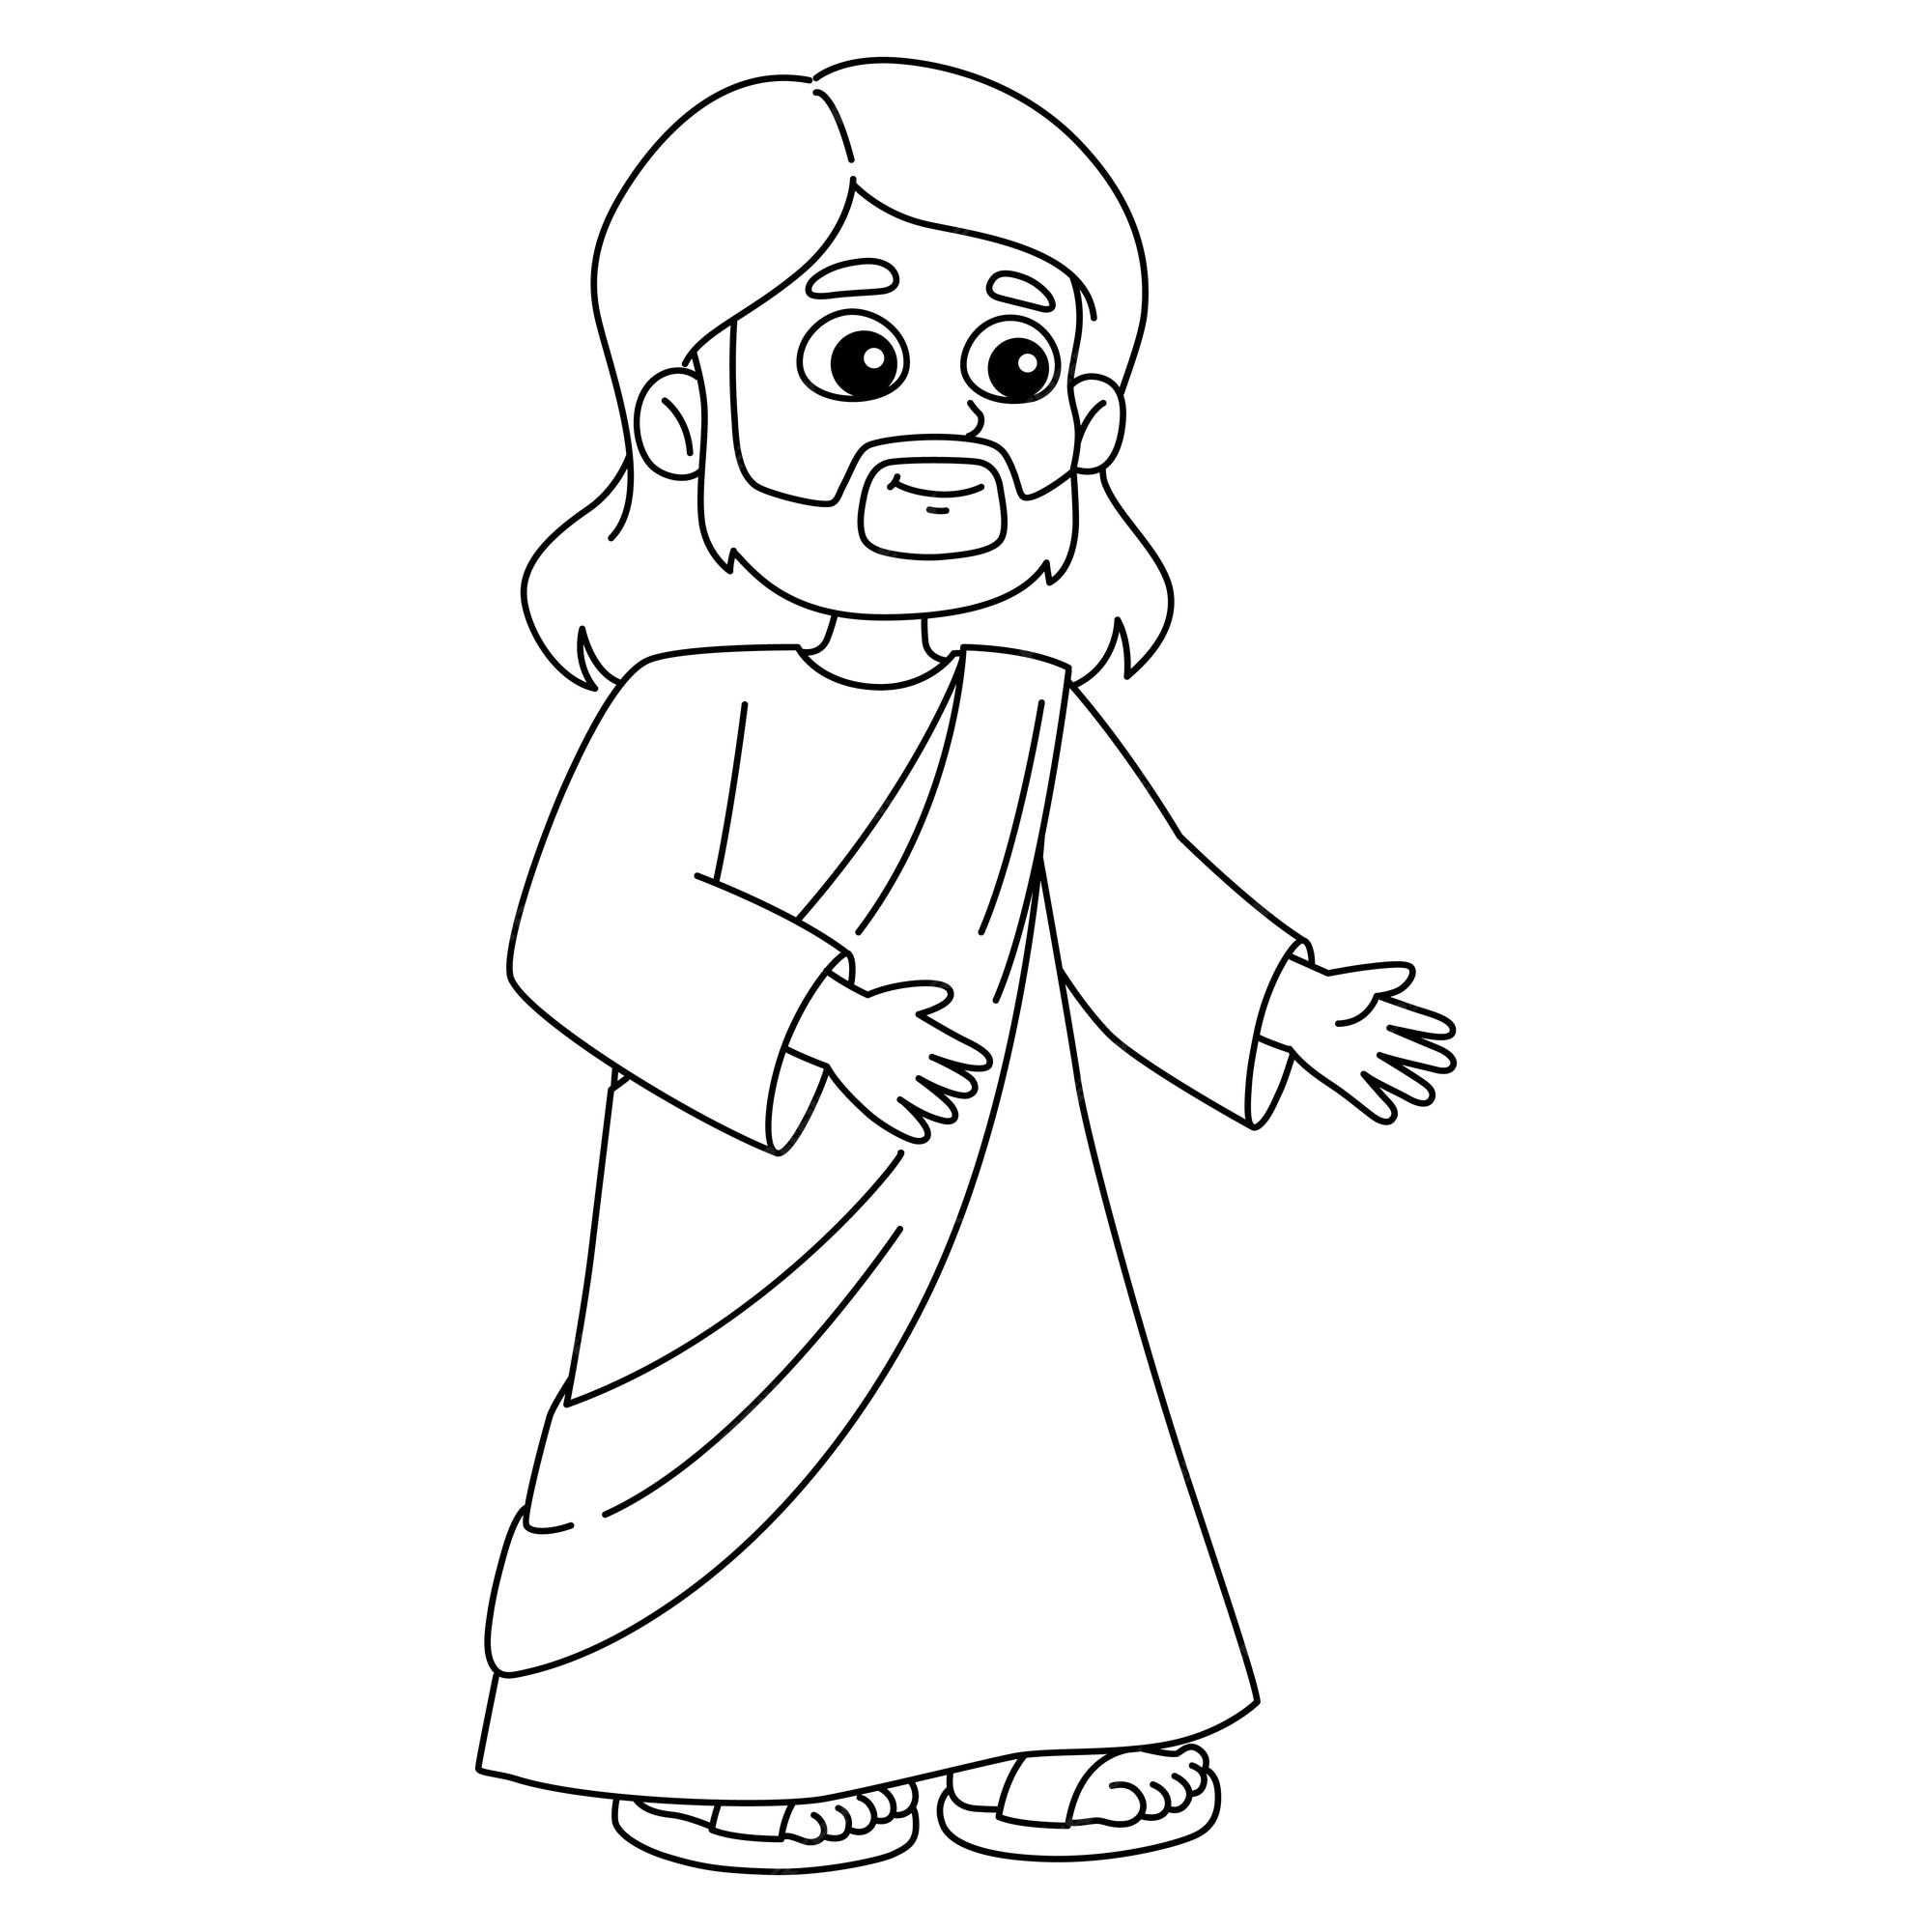 Premium vector jesus the messiah isolated coloring page for kids